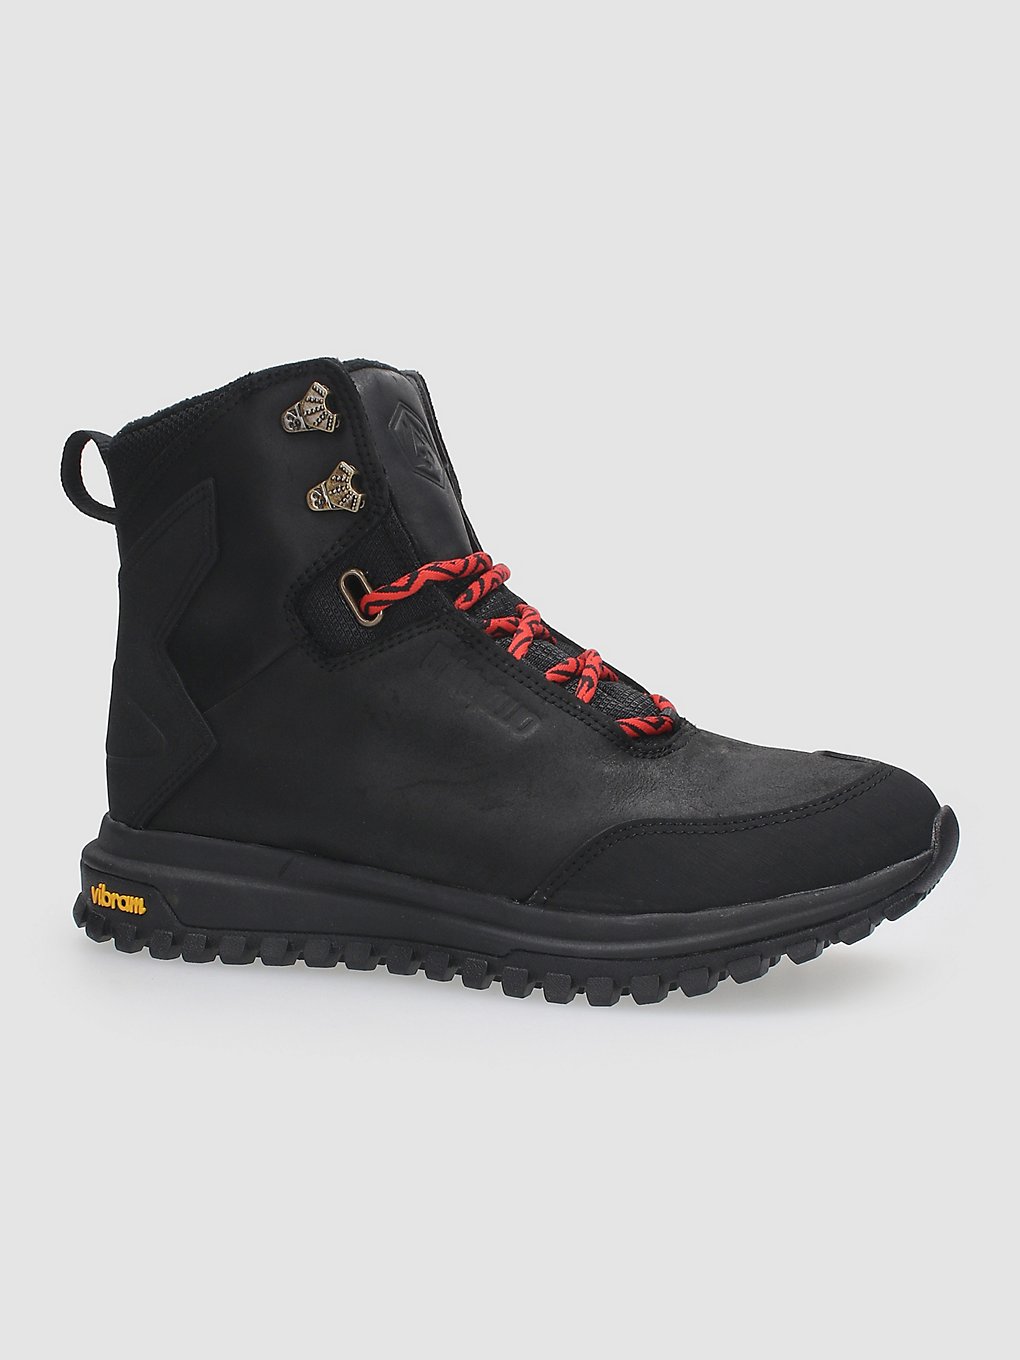 ThirtyTwo Digger Chaussures noir